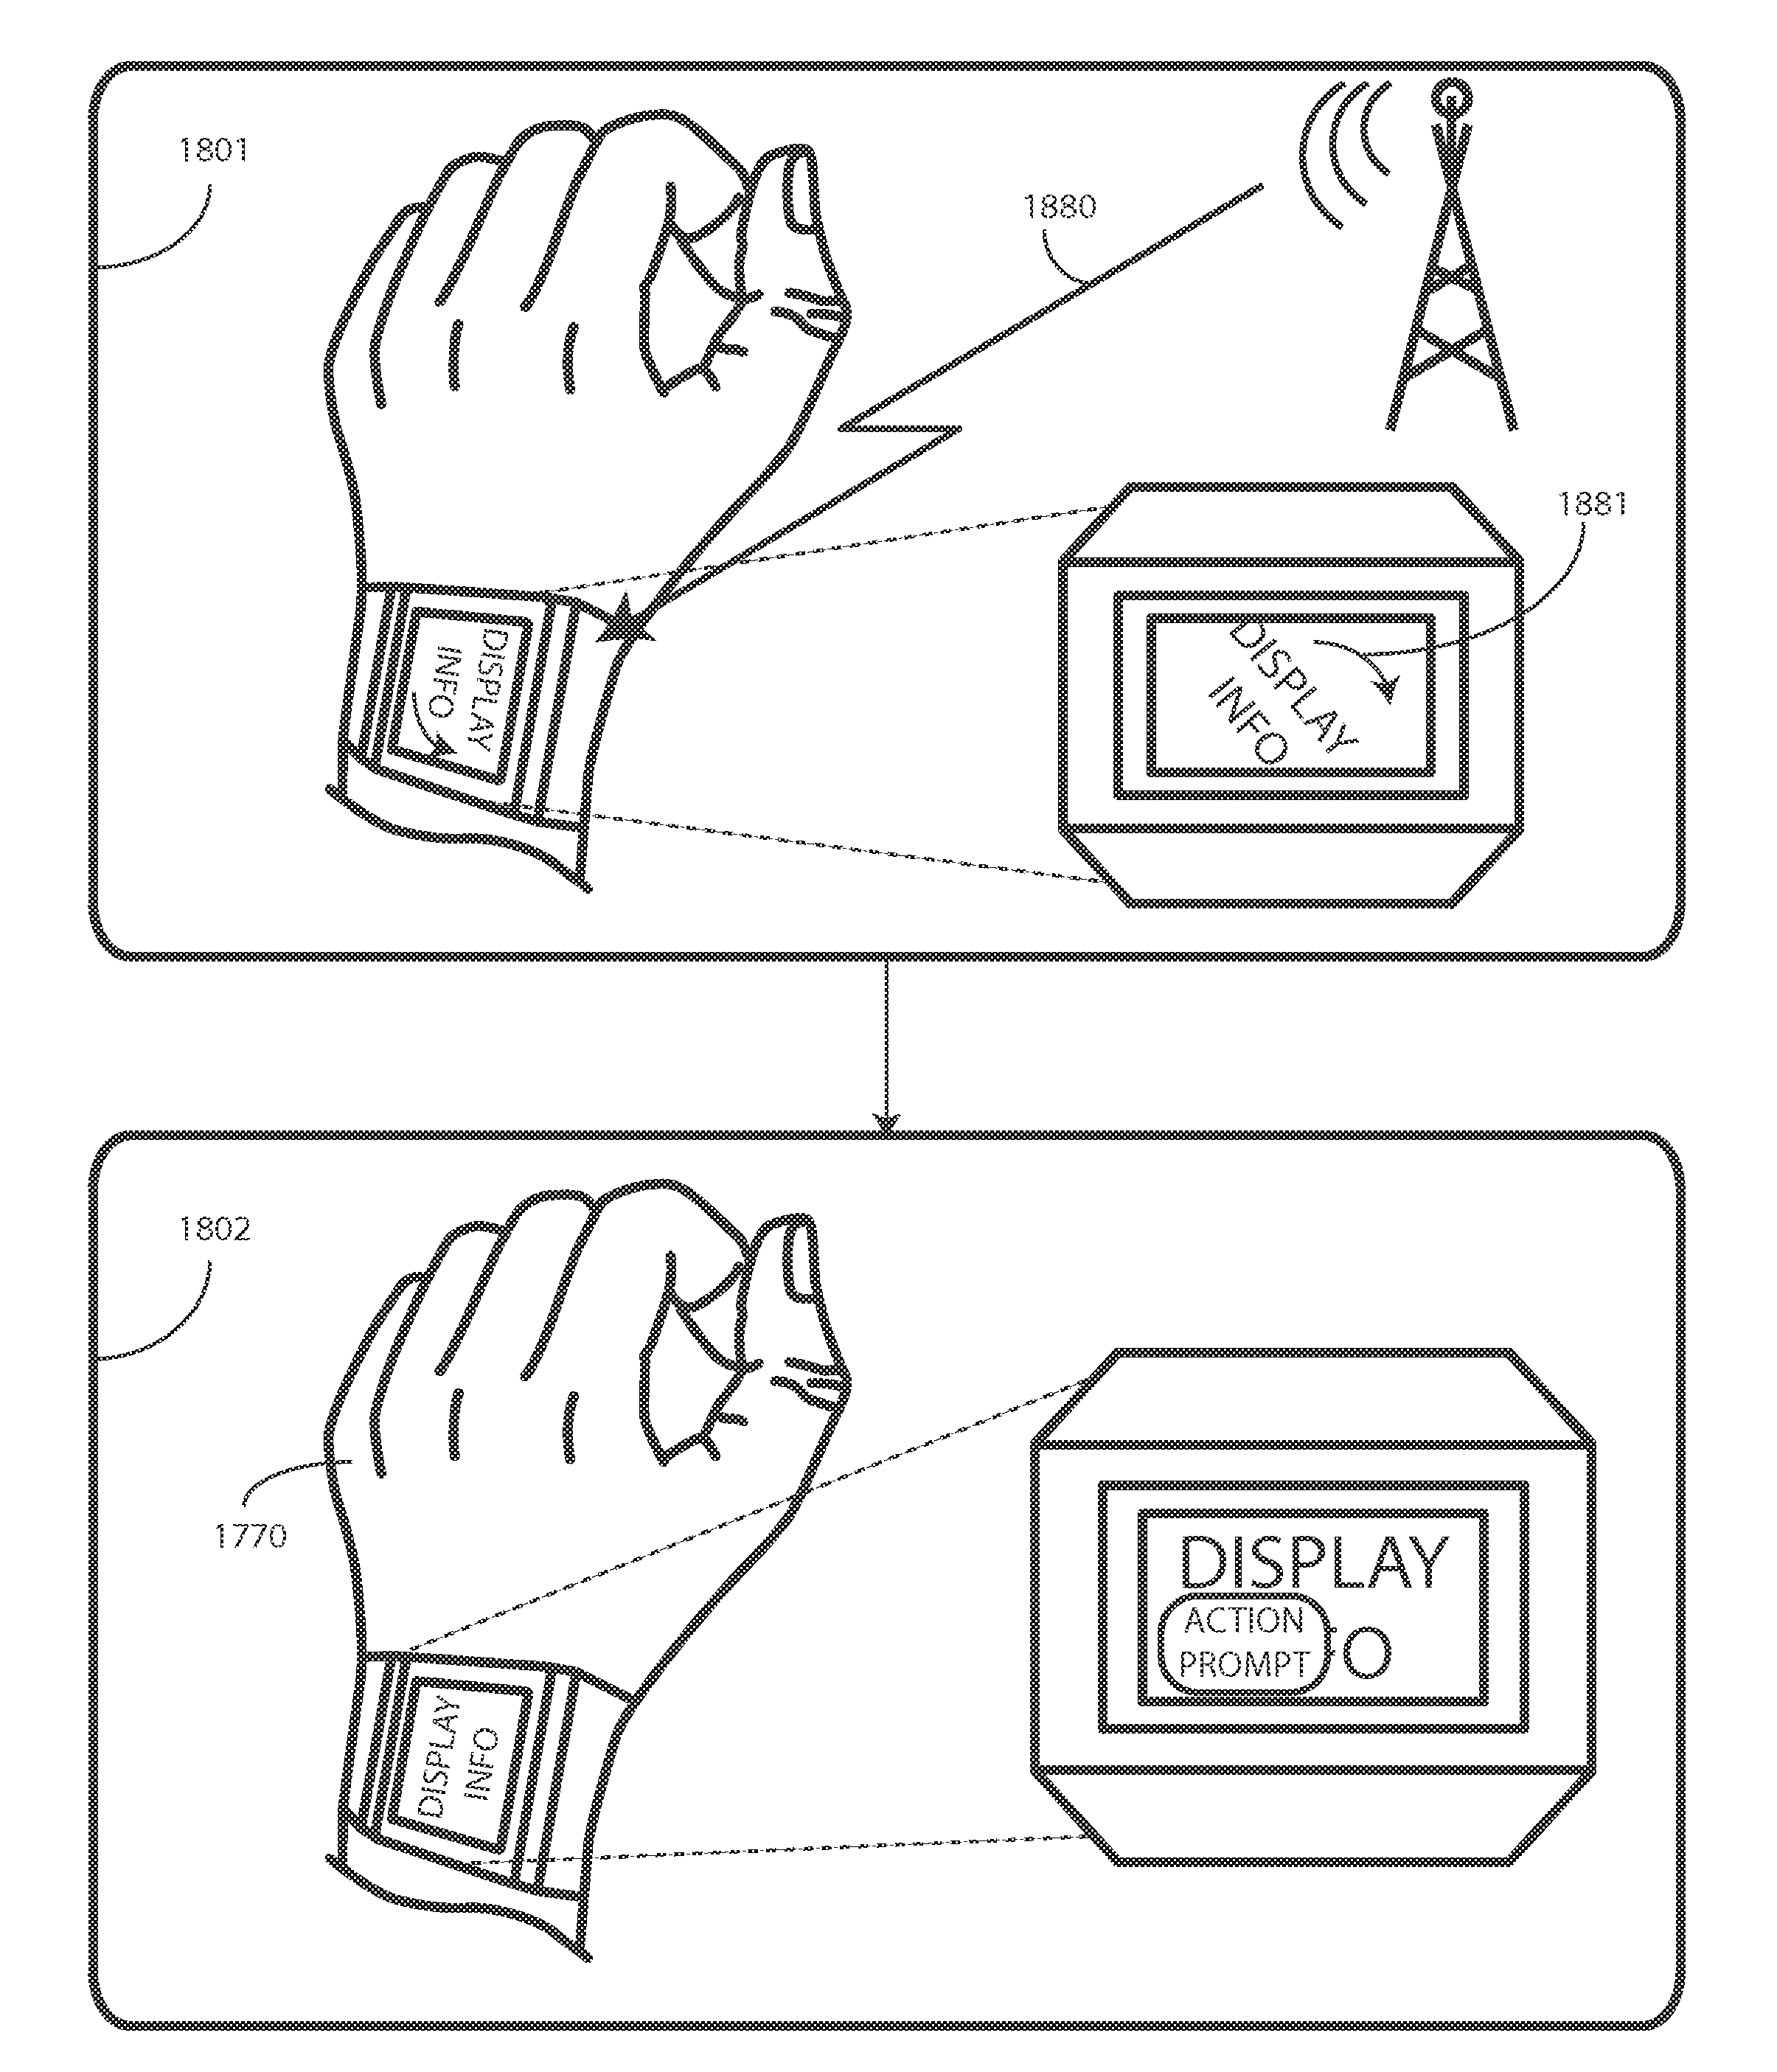 Display device, corresponding systems, and methods therefor